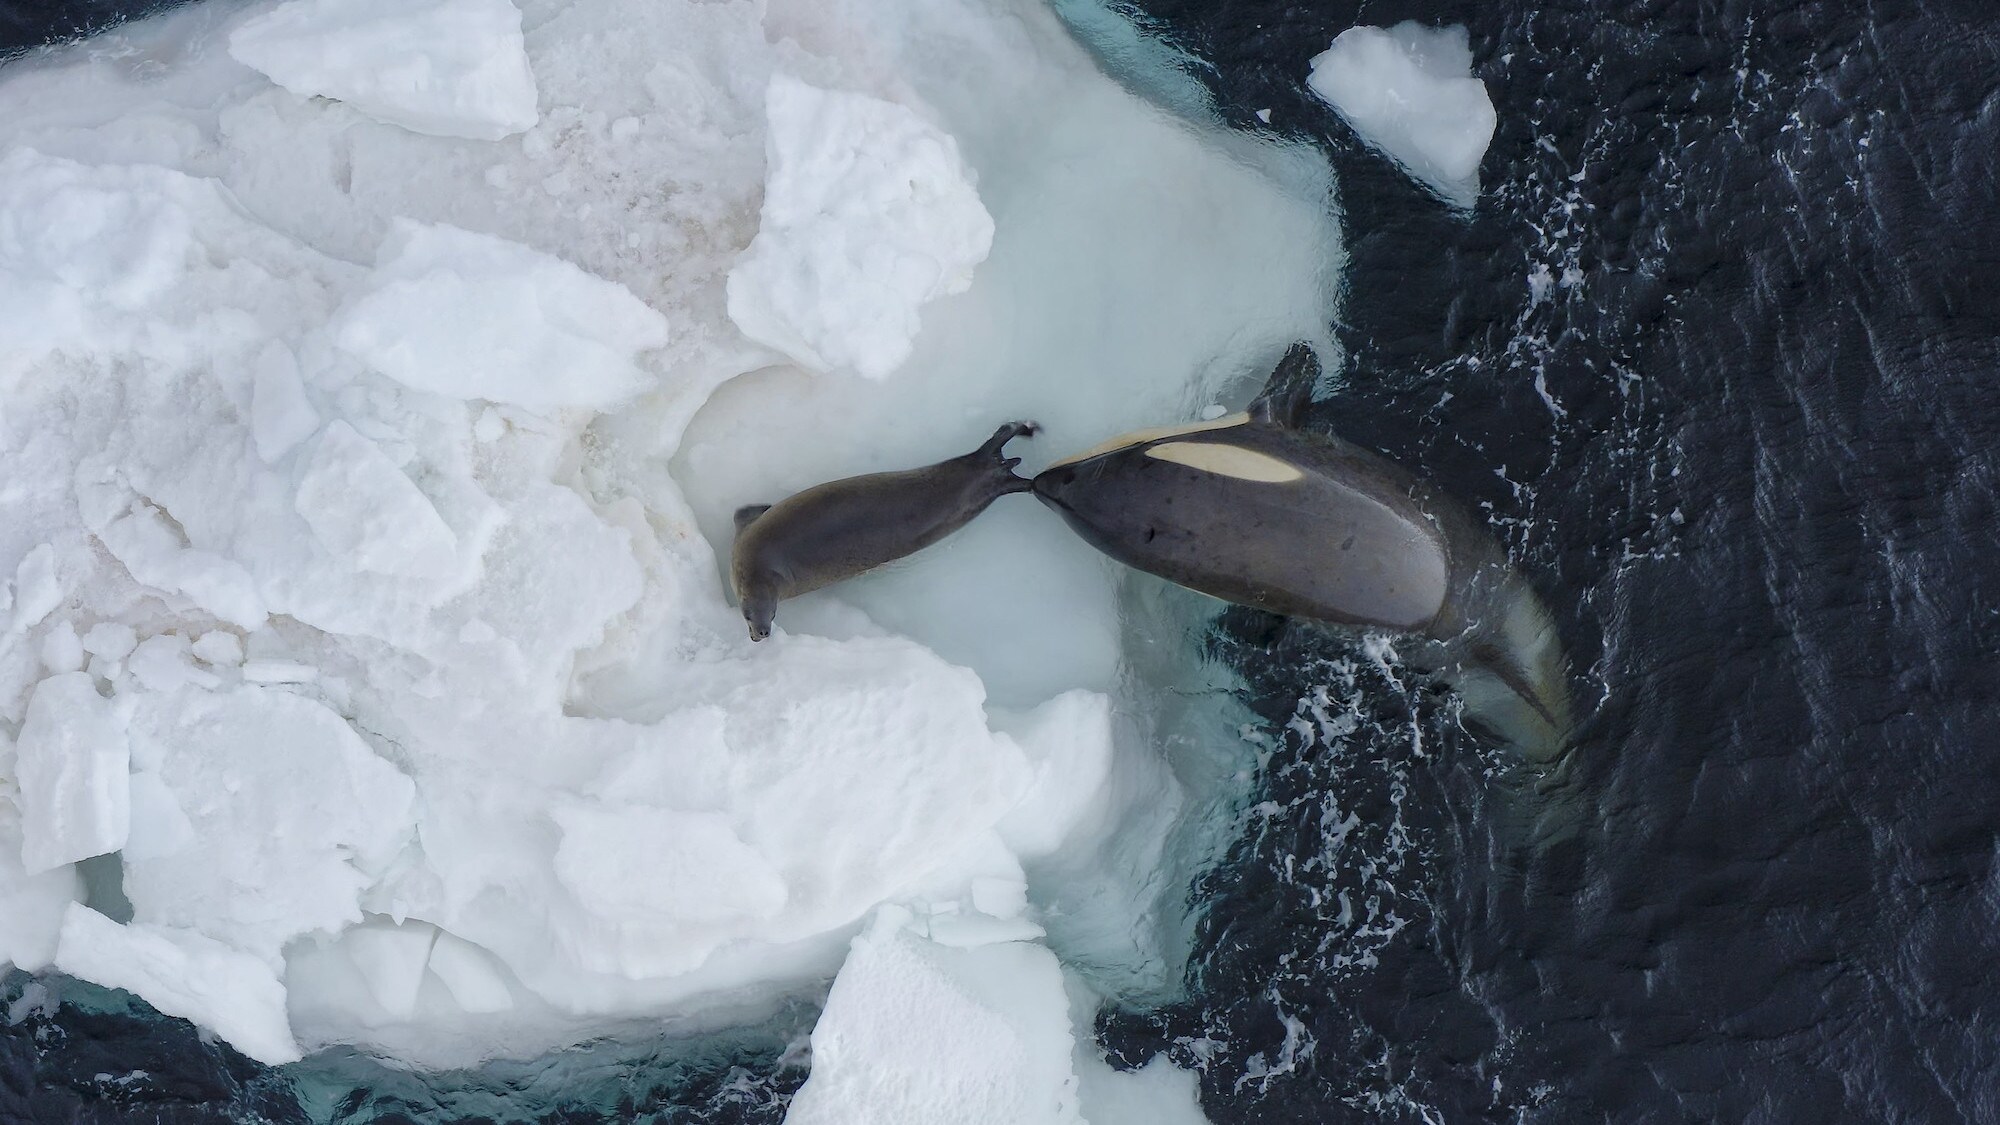 Aerial shot of a Weddel Seal on the ice being held by the tail flipper by a Killer Whale half out of the water on the ice. (credit: National Geographic for Disney+/Bertie Gregory)